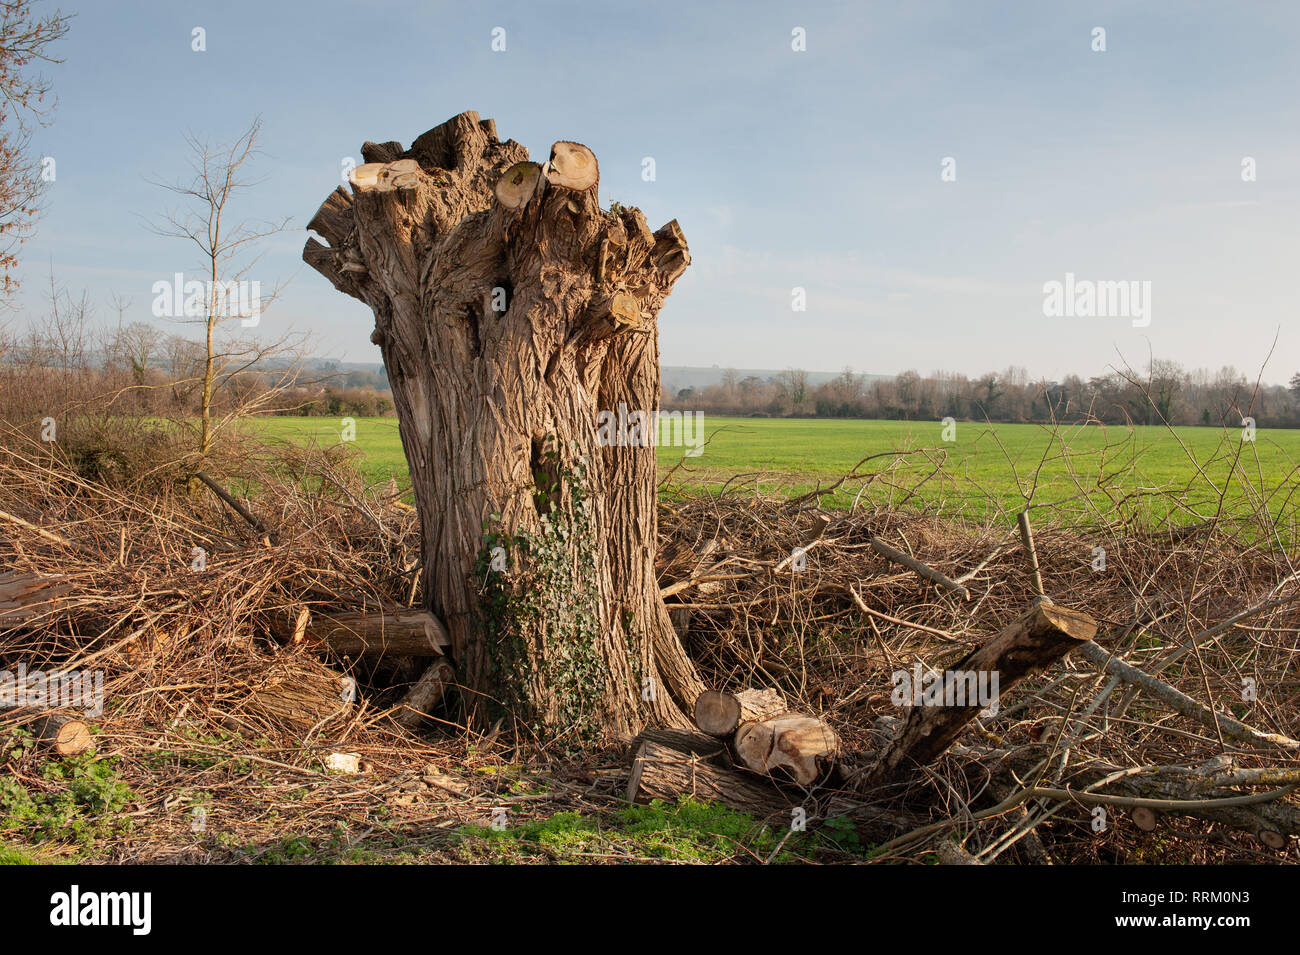 Heavily pollarded Willow tree at edge of field. Stock Photo